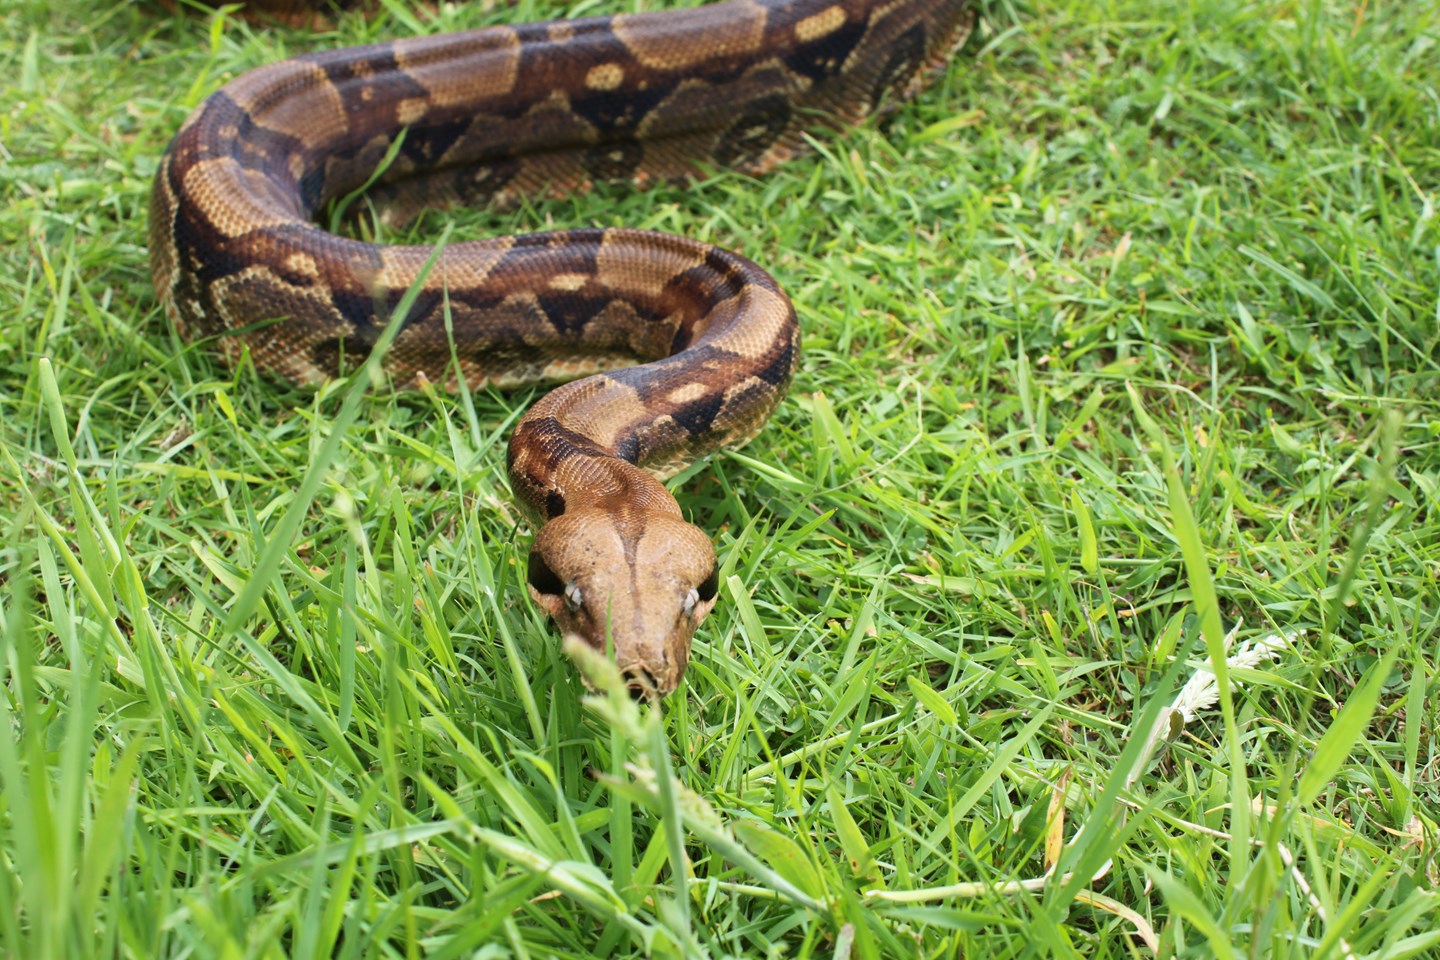 How Boa Constrictors Breathe While Squeezing the Life Out of Their